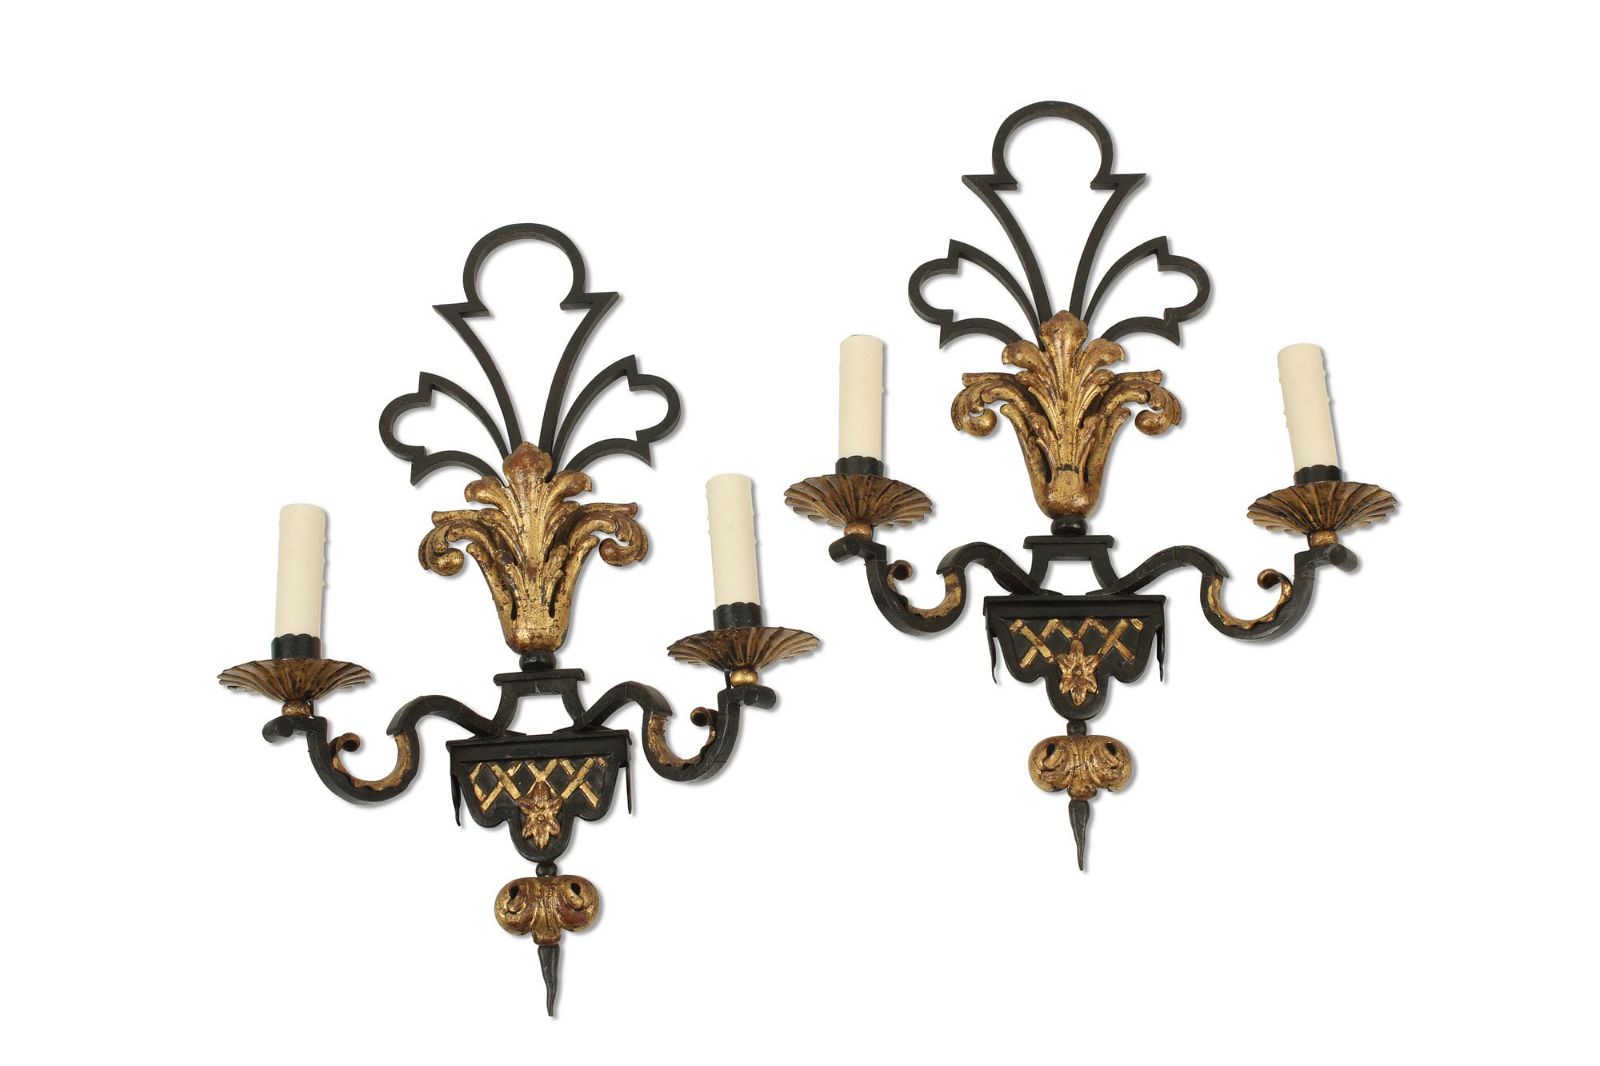 A PAIR OF WROUGHT IRON WALL SCONCES,